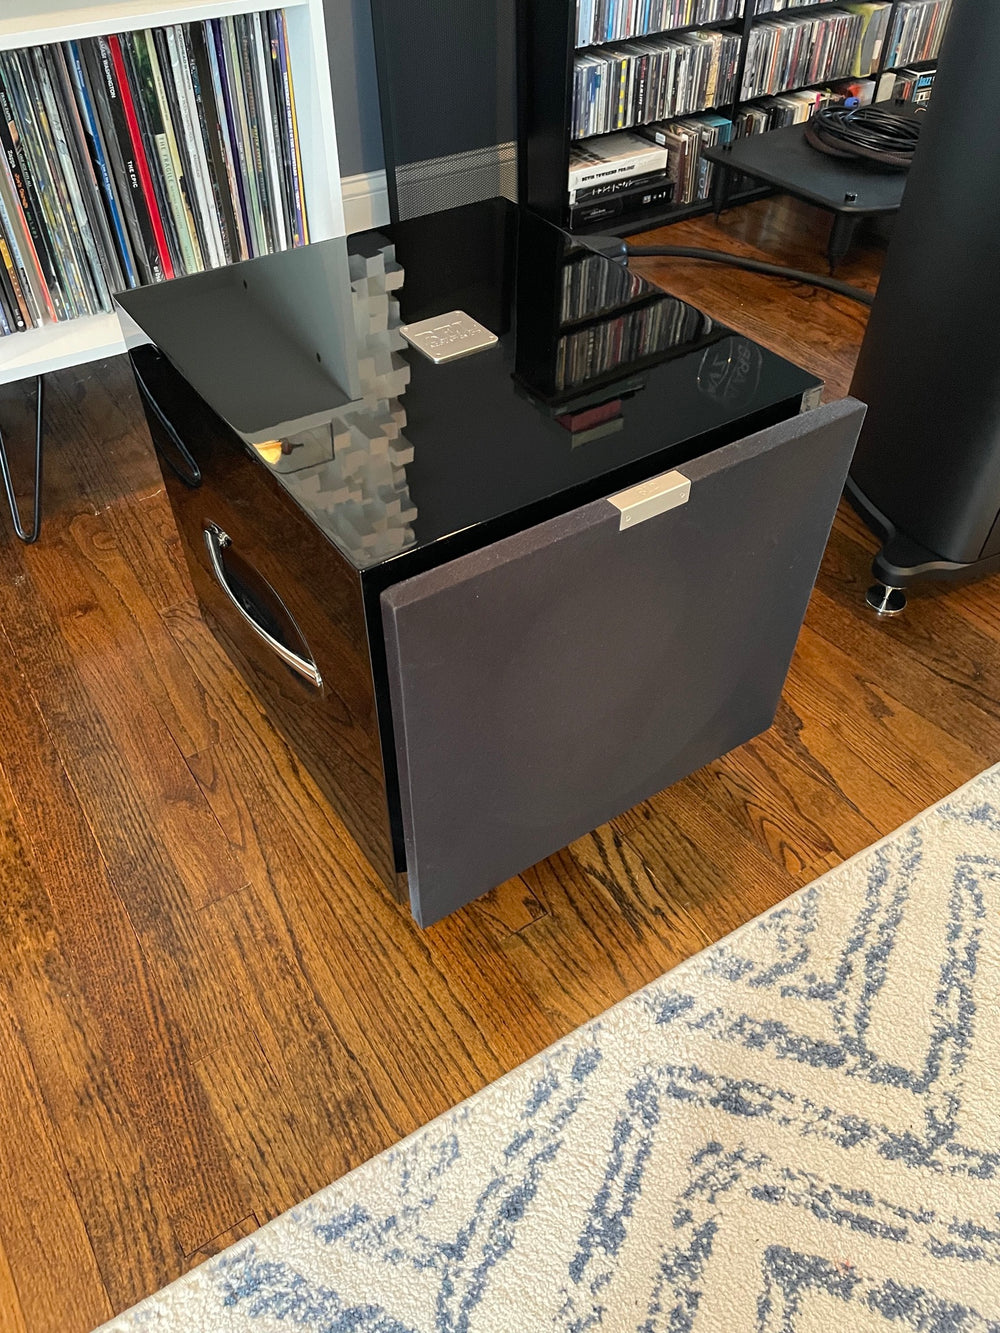 REL S/812 Subwoofer [Previously Owned]